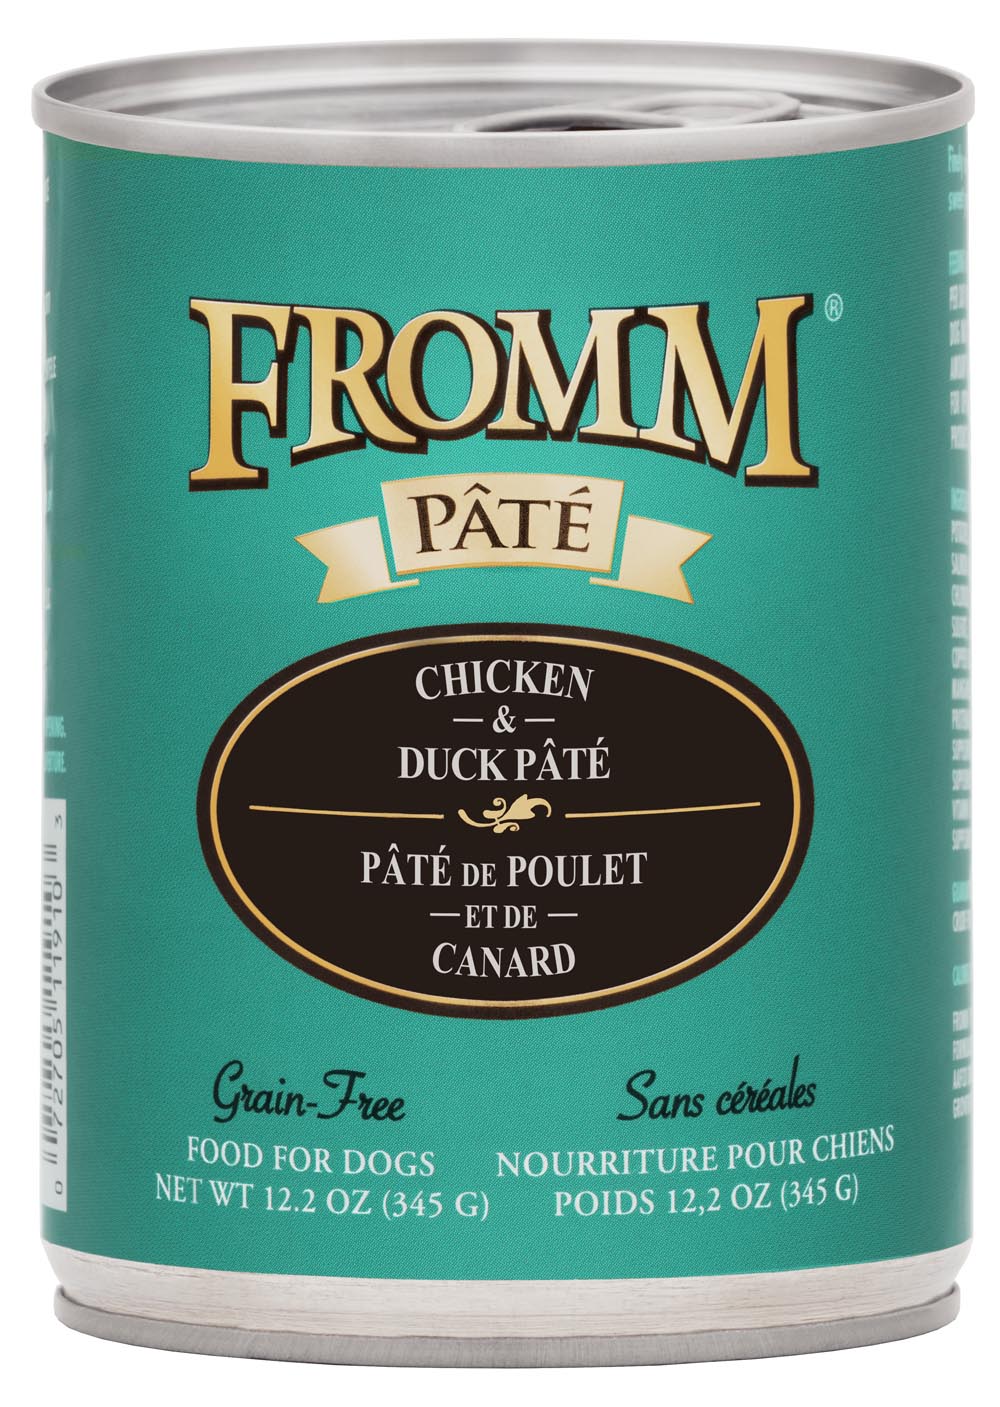 Fromm Chicken & Duck Pate Food for Dogs, 12.2 oz